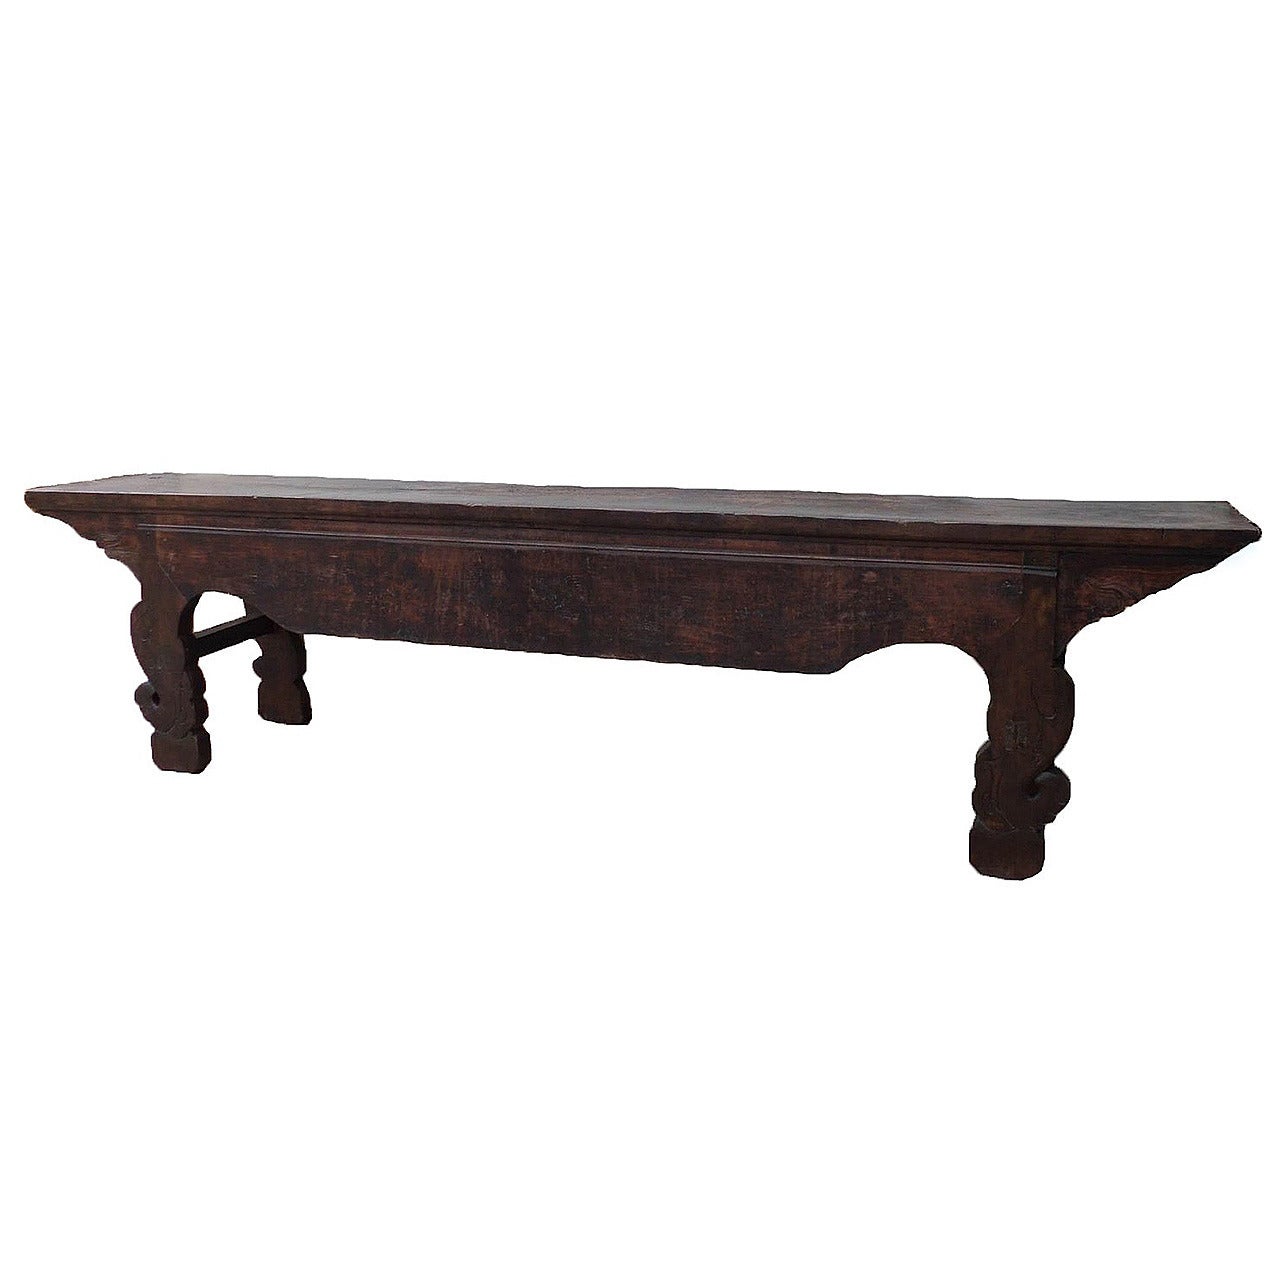 Extra Long Antique Nine Foot Bench, 19th Century Chinese